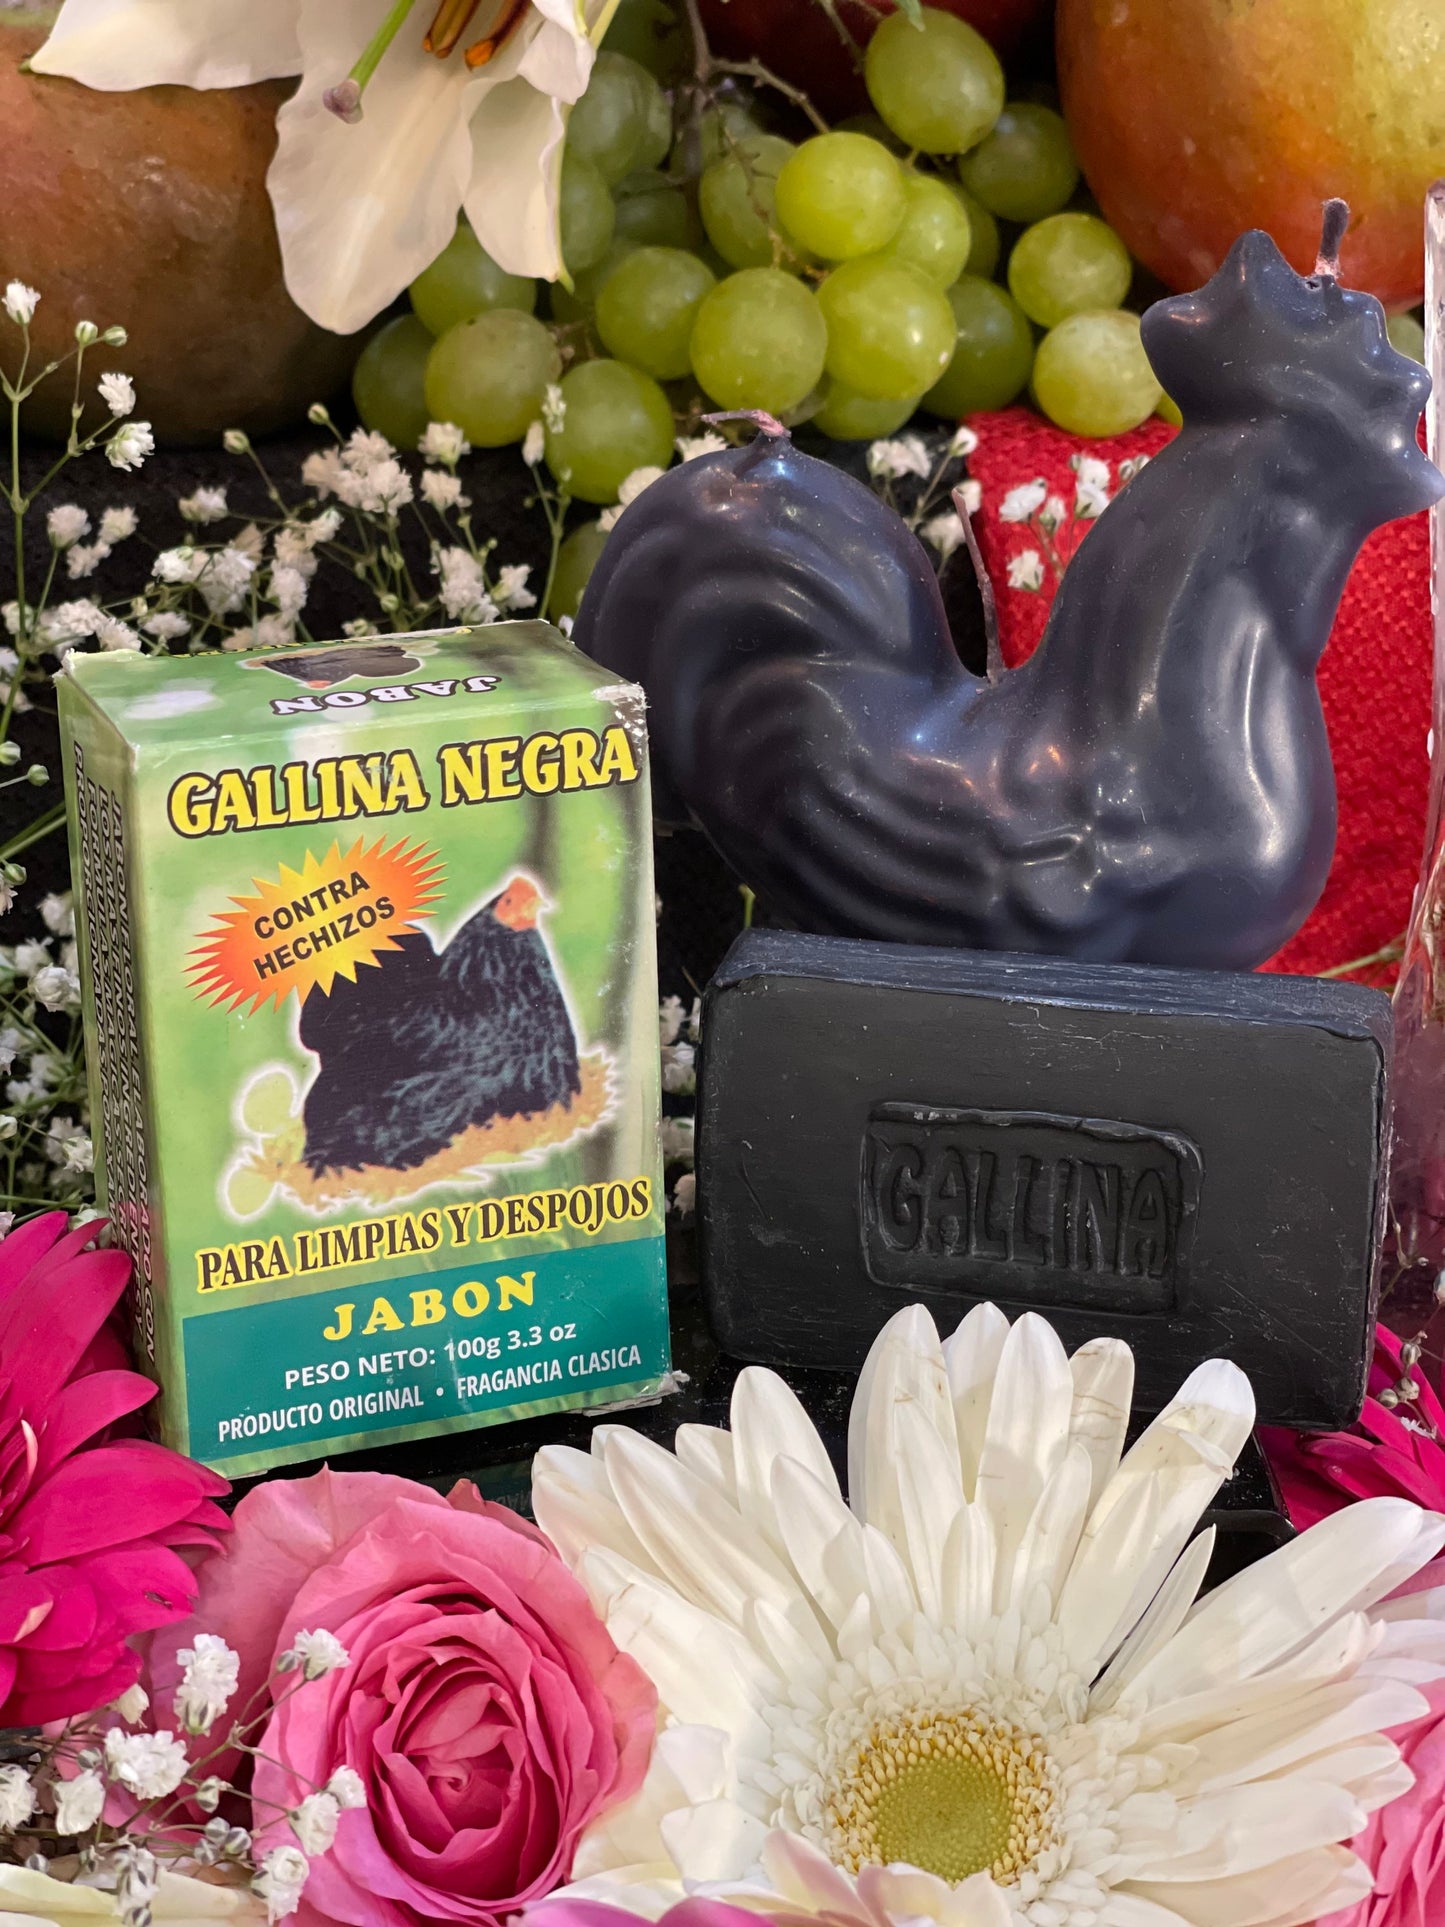 Gallina Negra Soap + Black Chicken/Hen + Uncrossing + Cleansing + Made in Mexico + Jabon + Black Pullet